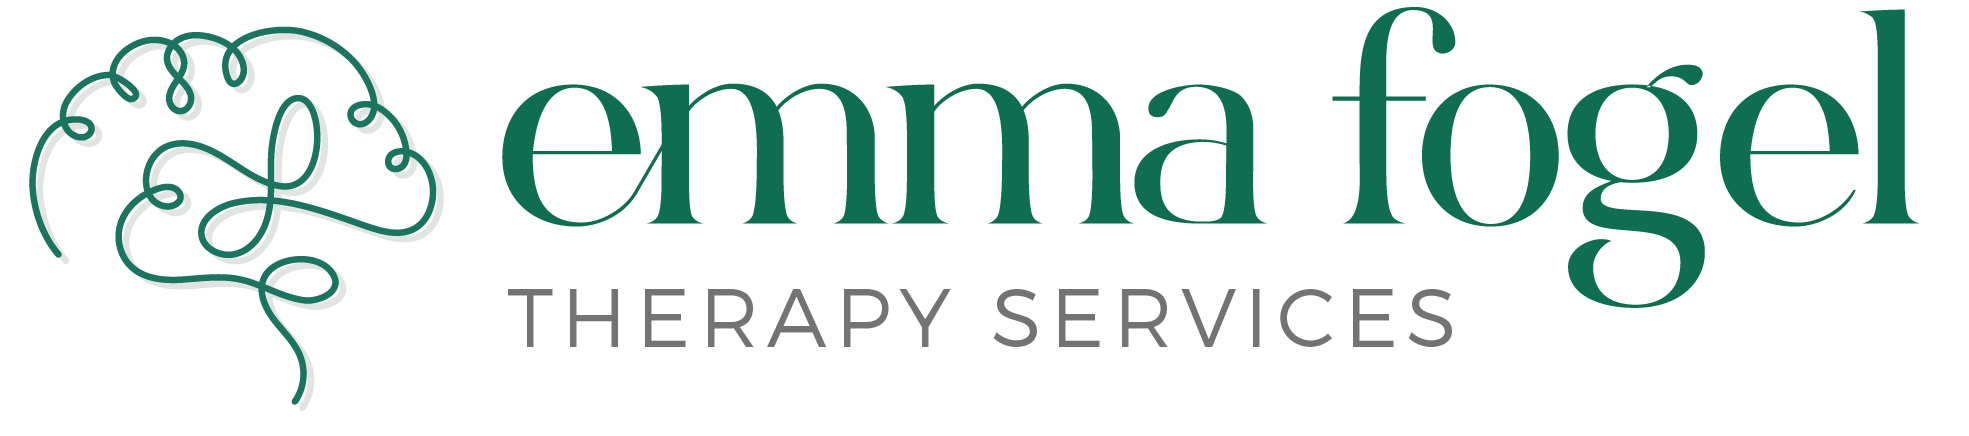 Emma Fogel Therapy Services